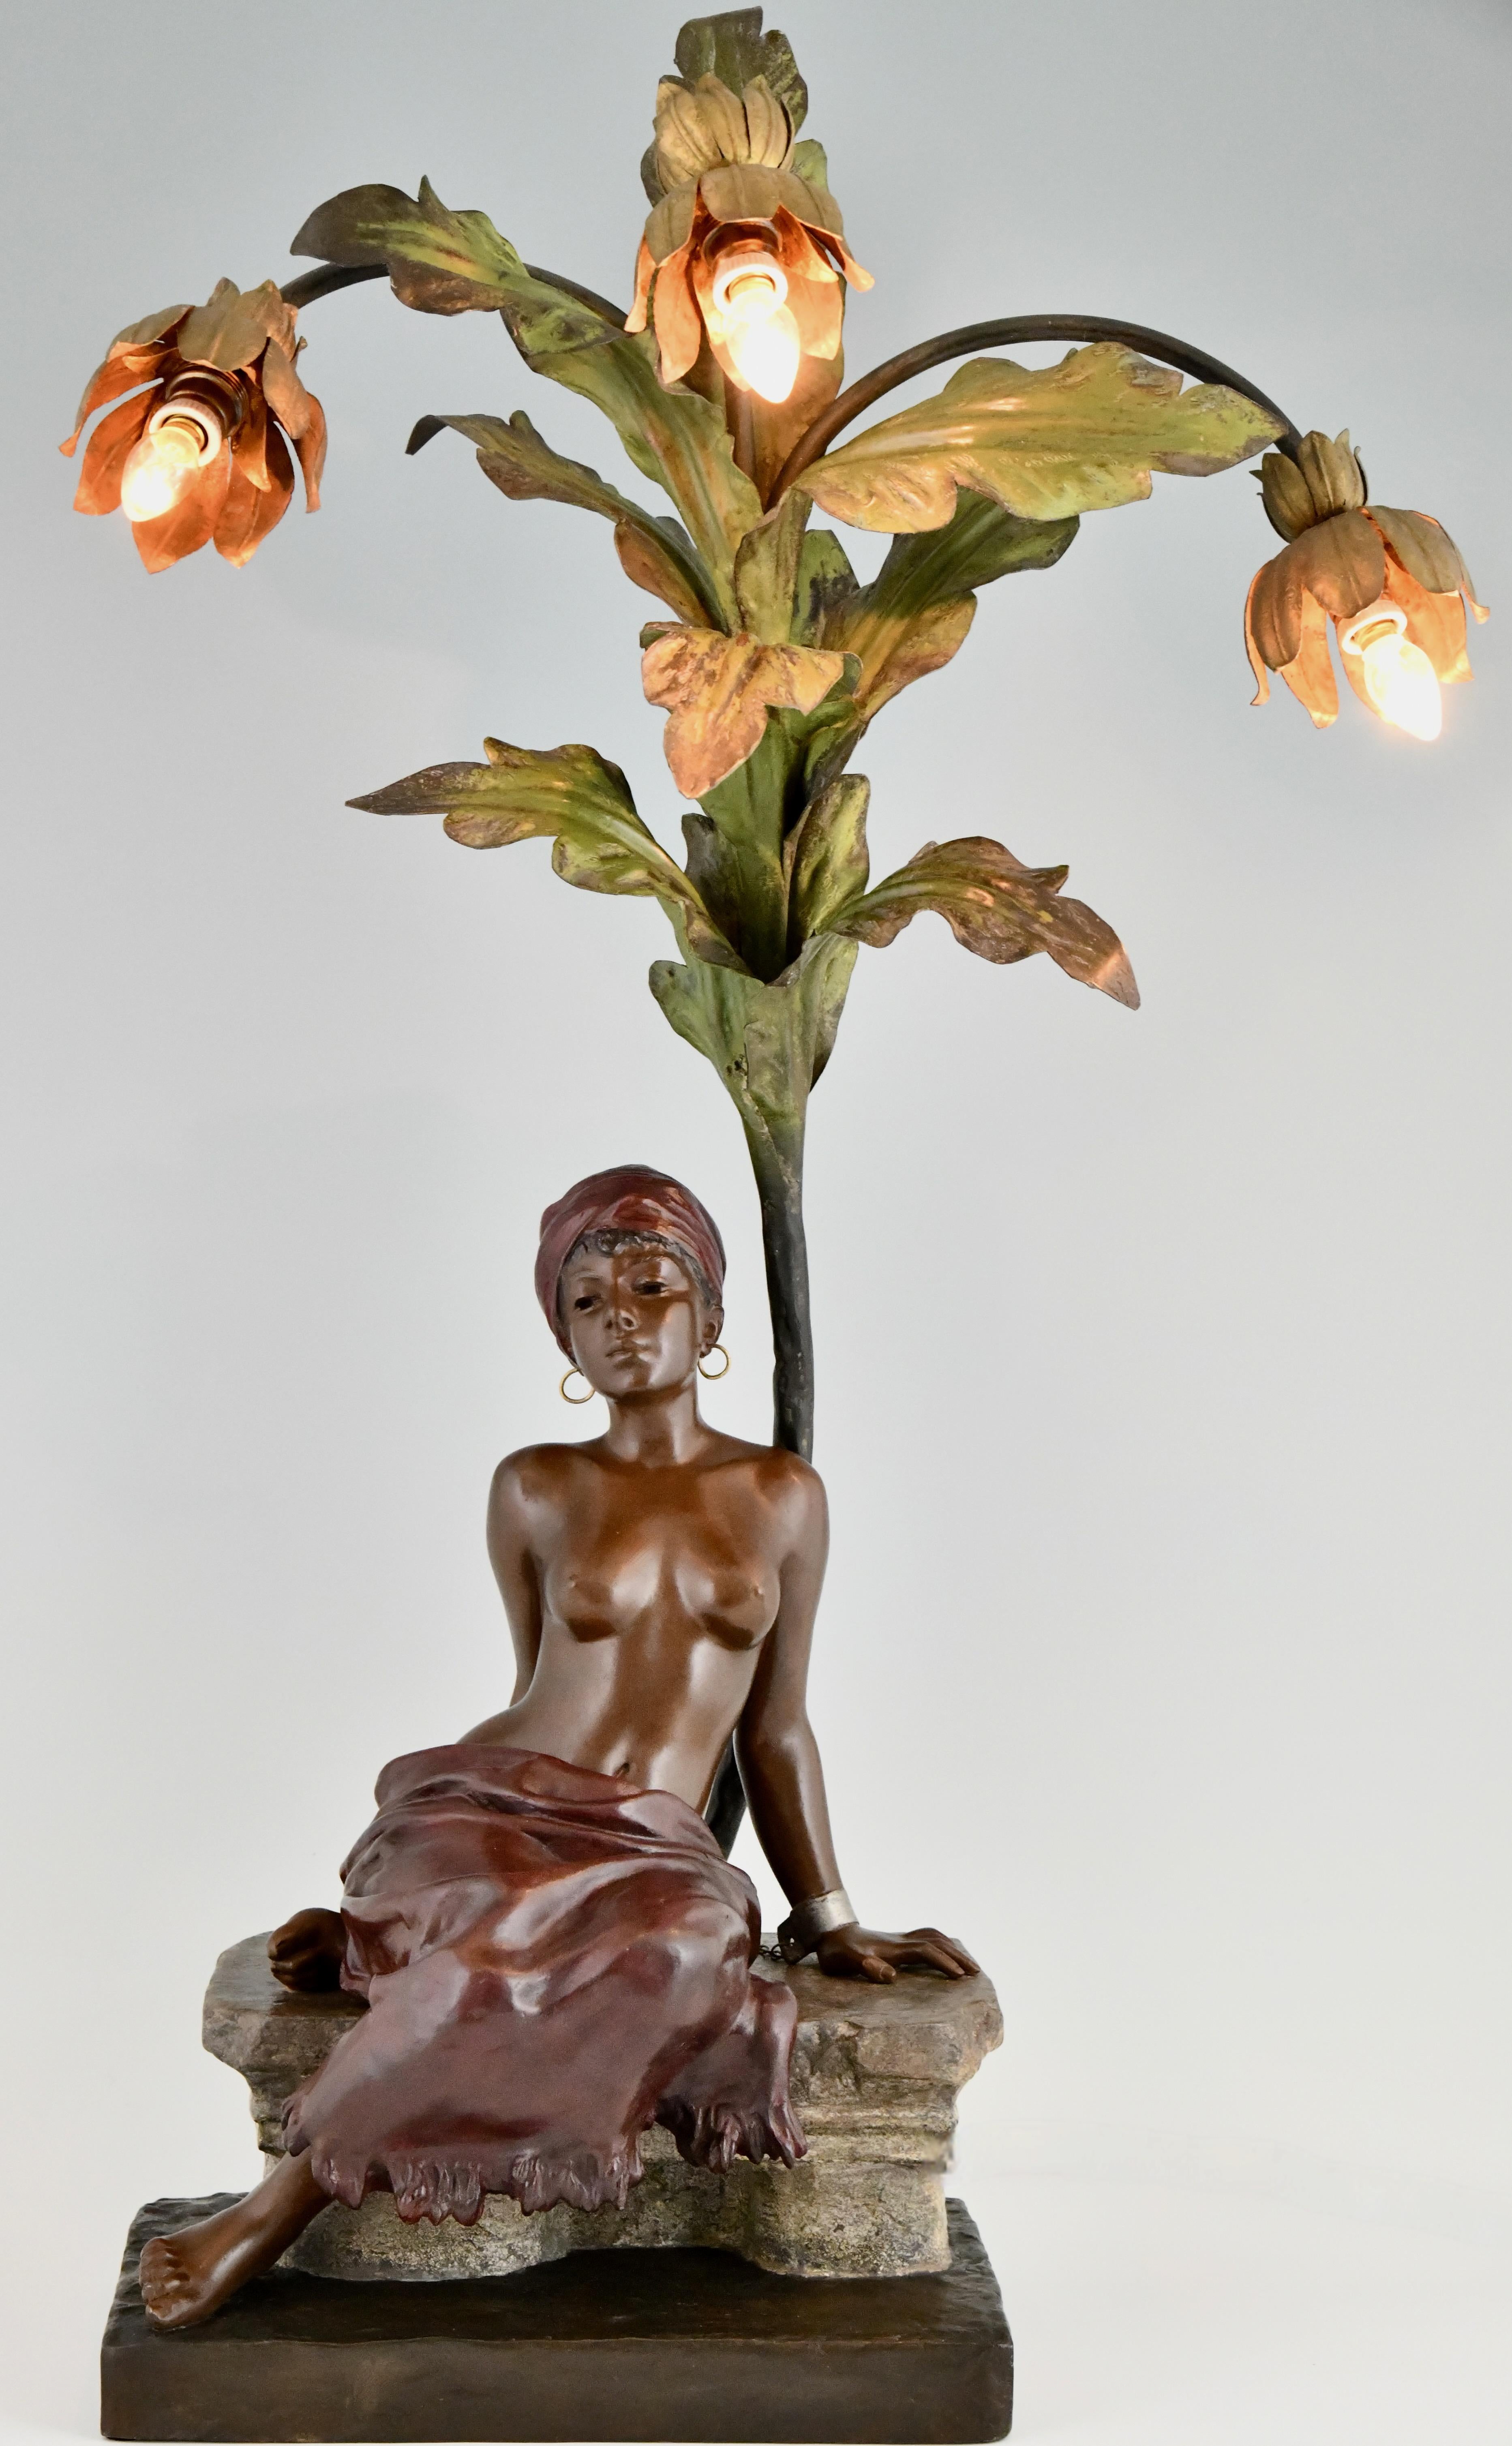 Art Nouveau lamp slave girl under palm tree by Emmanuel Villanis, removable skirt, erotic. 
Art metal, cold painted patina. France 1900. 
H. 82 cm. 
A slave girl sitting under a palm tree, her hands chained behind her back. 
She is wearing earrings,